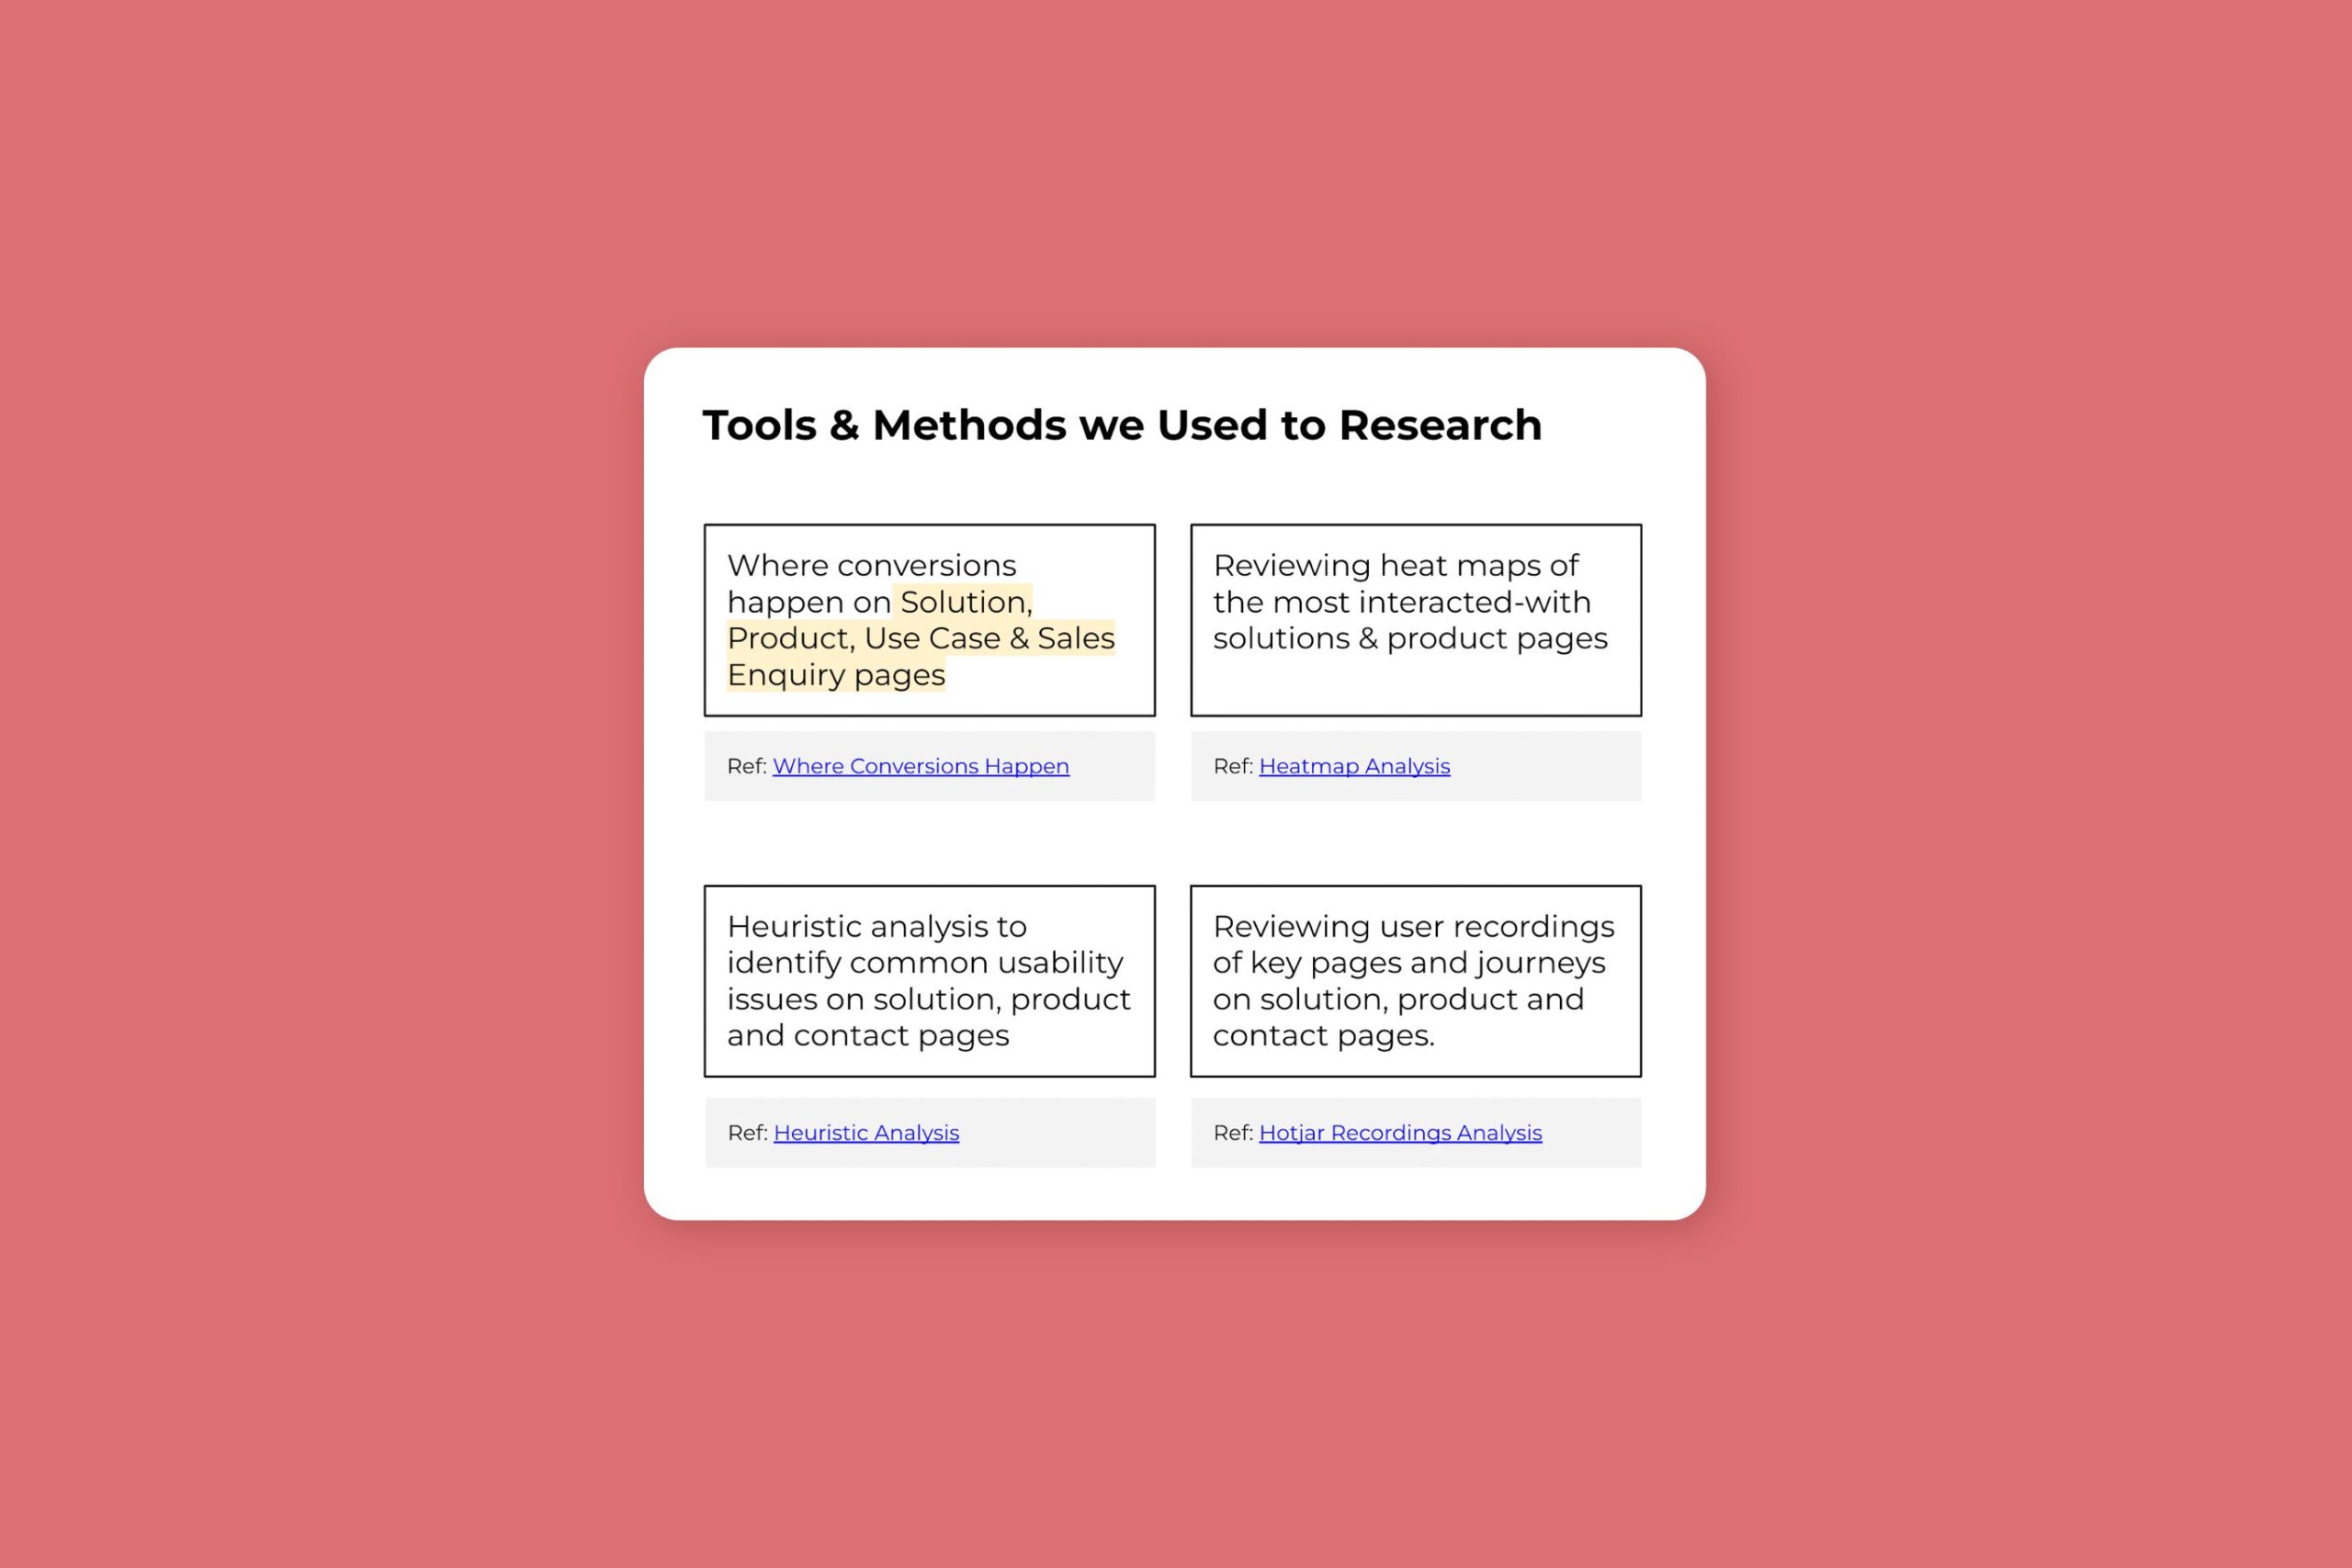 Tools and methods we used to research